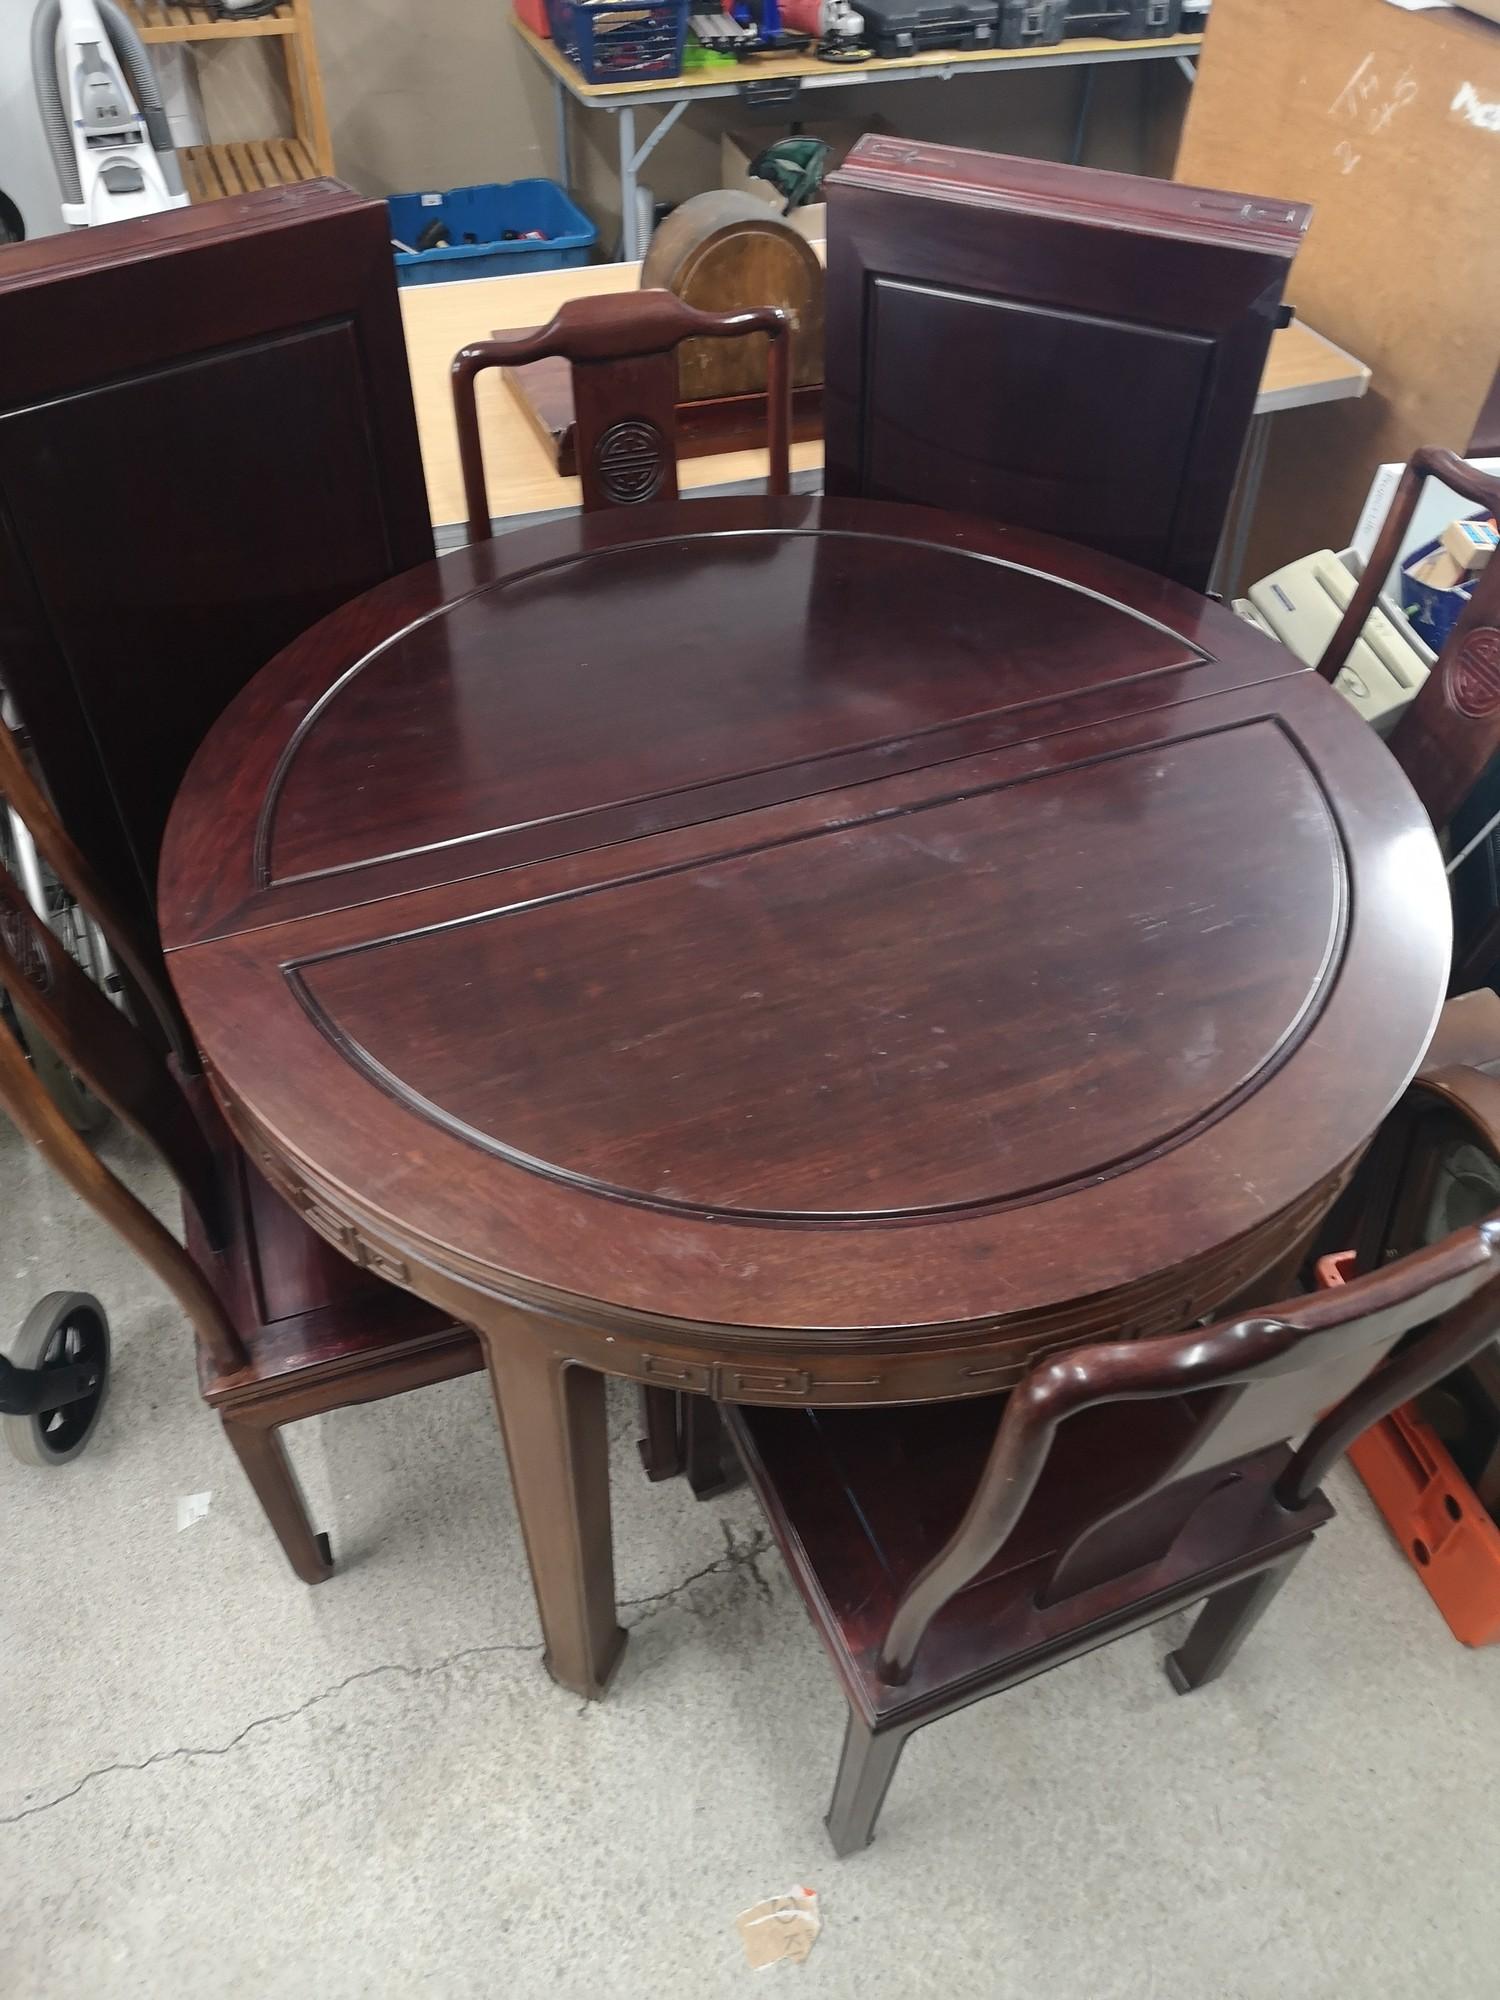 Chinese table with 4 chairs and two extending leafs.